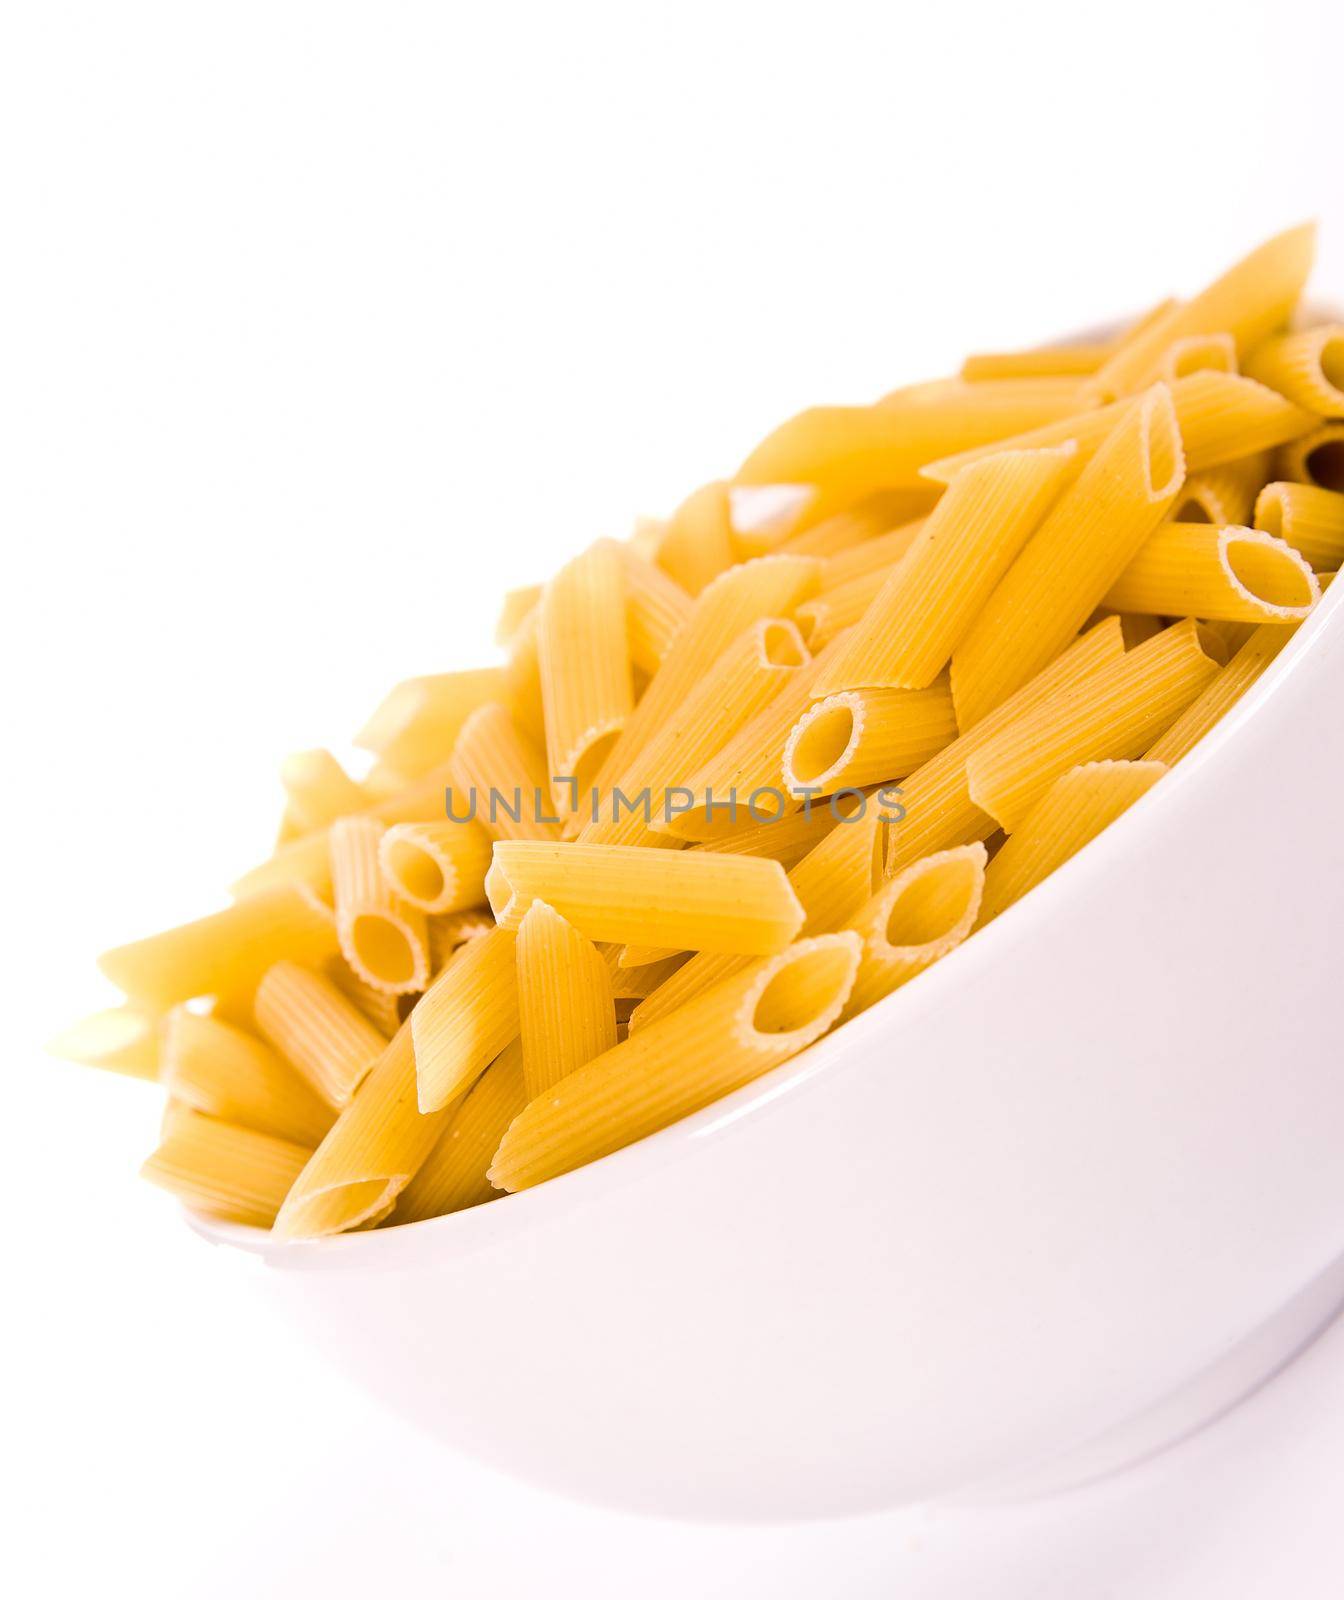 raw noodles over a white background close up